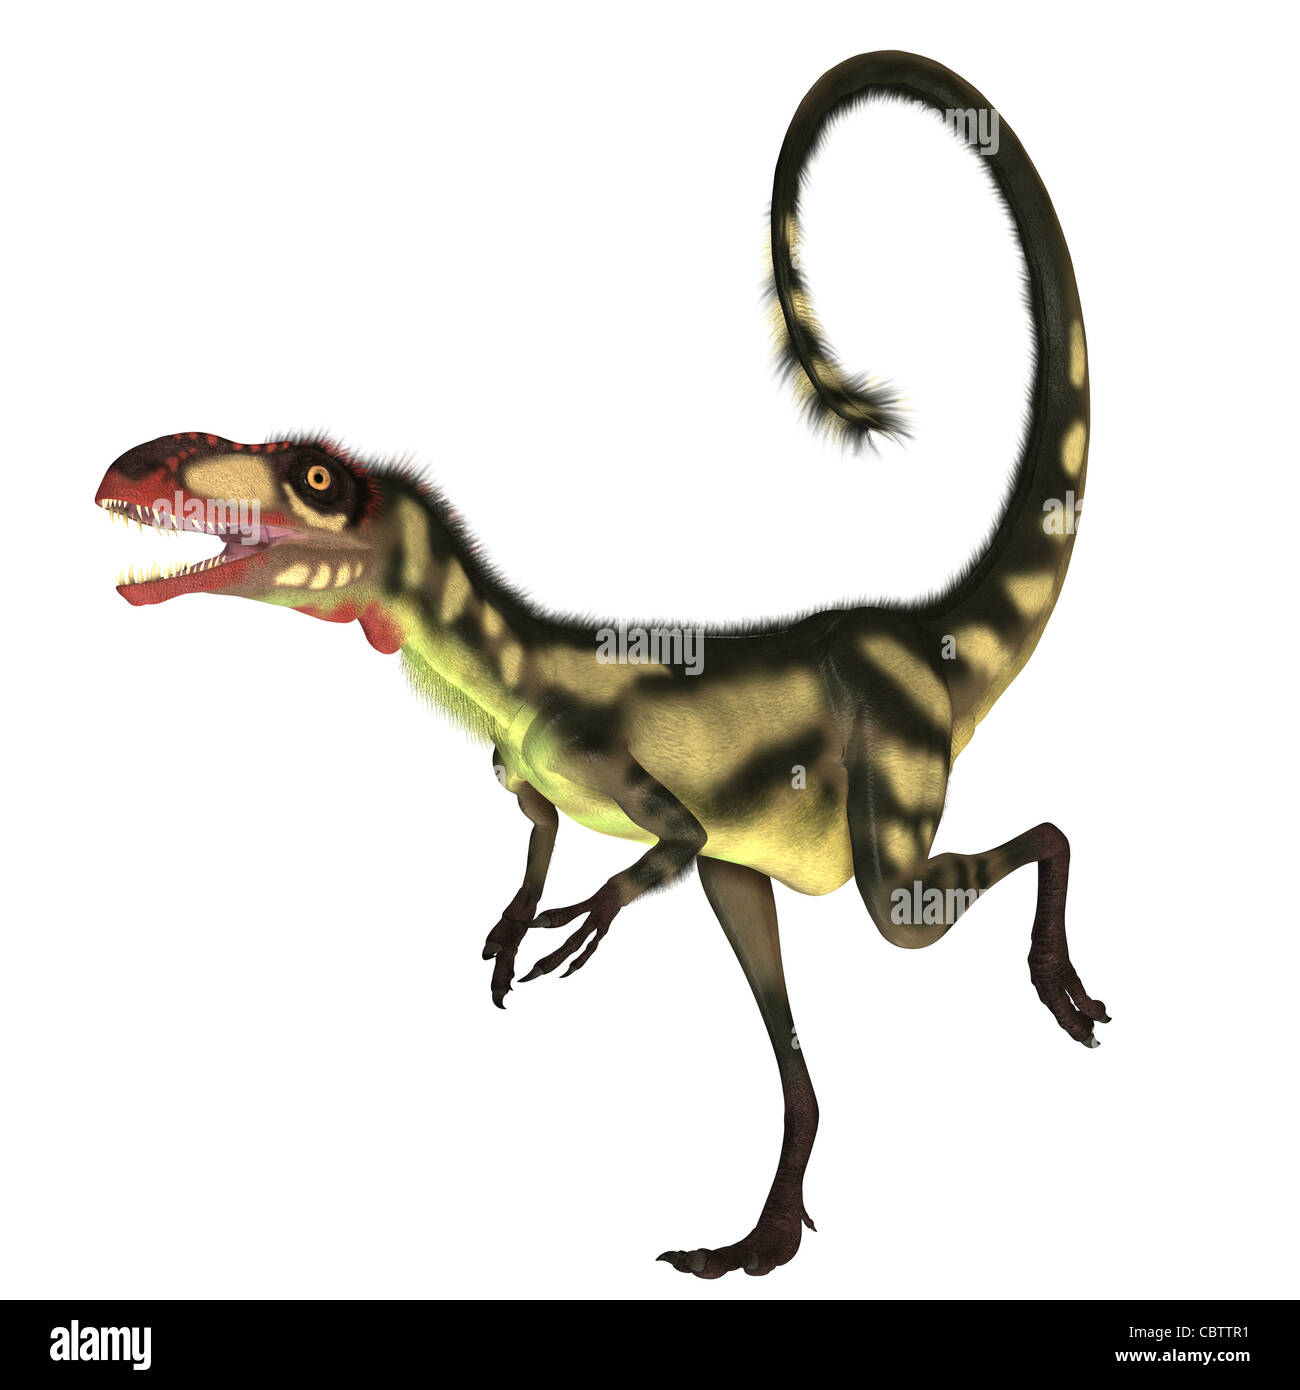 This dinosaur is a small size version of Tyrannosaurus Rex and is of the same genus Stock Photo